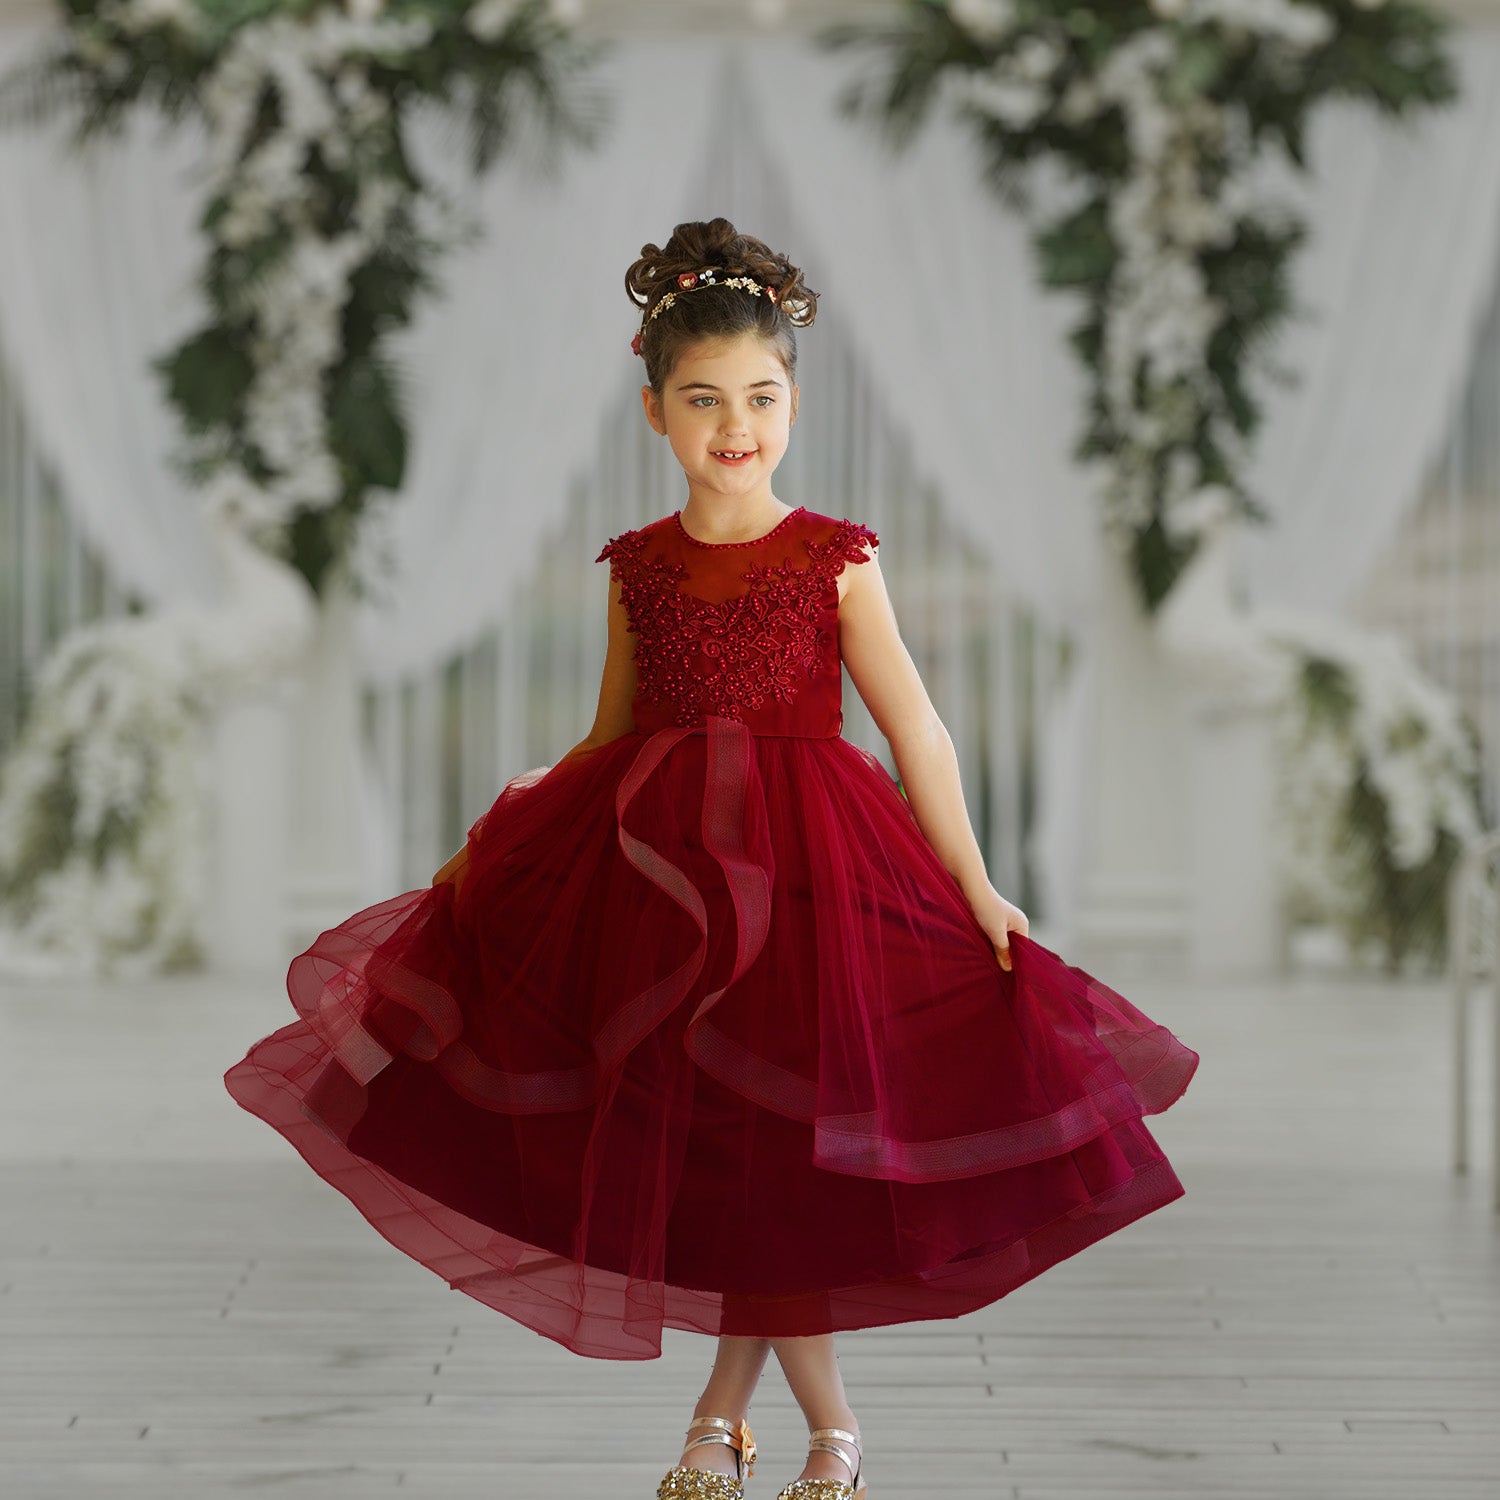 Cosy and Cute Flower Girl Dresses for a Winter Wedding | Boys Indian Clothes